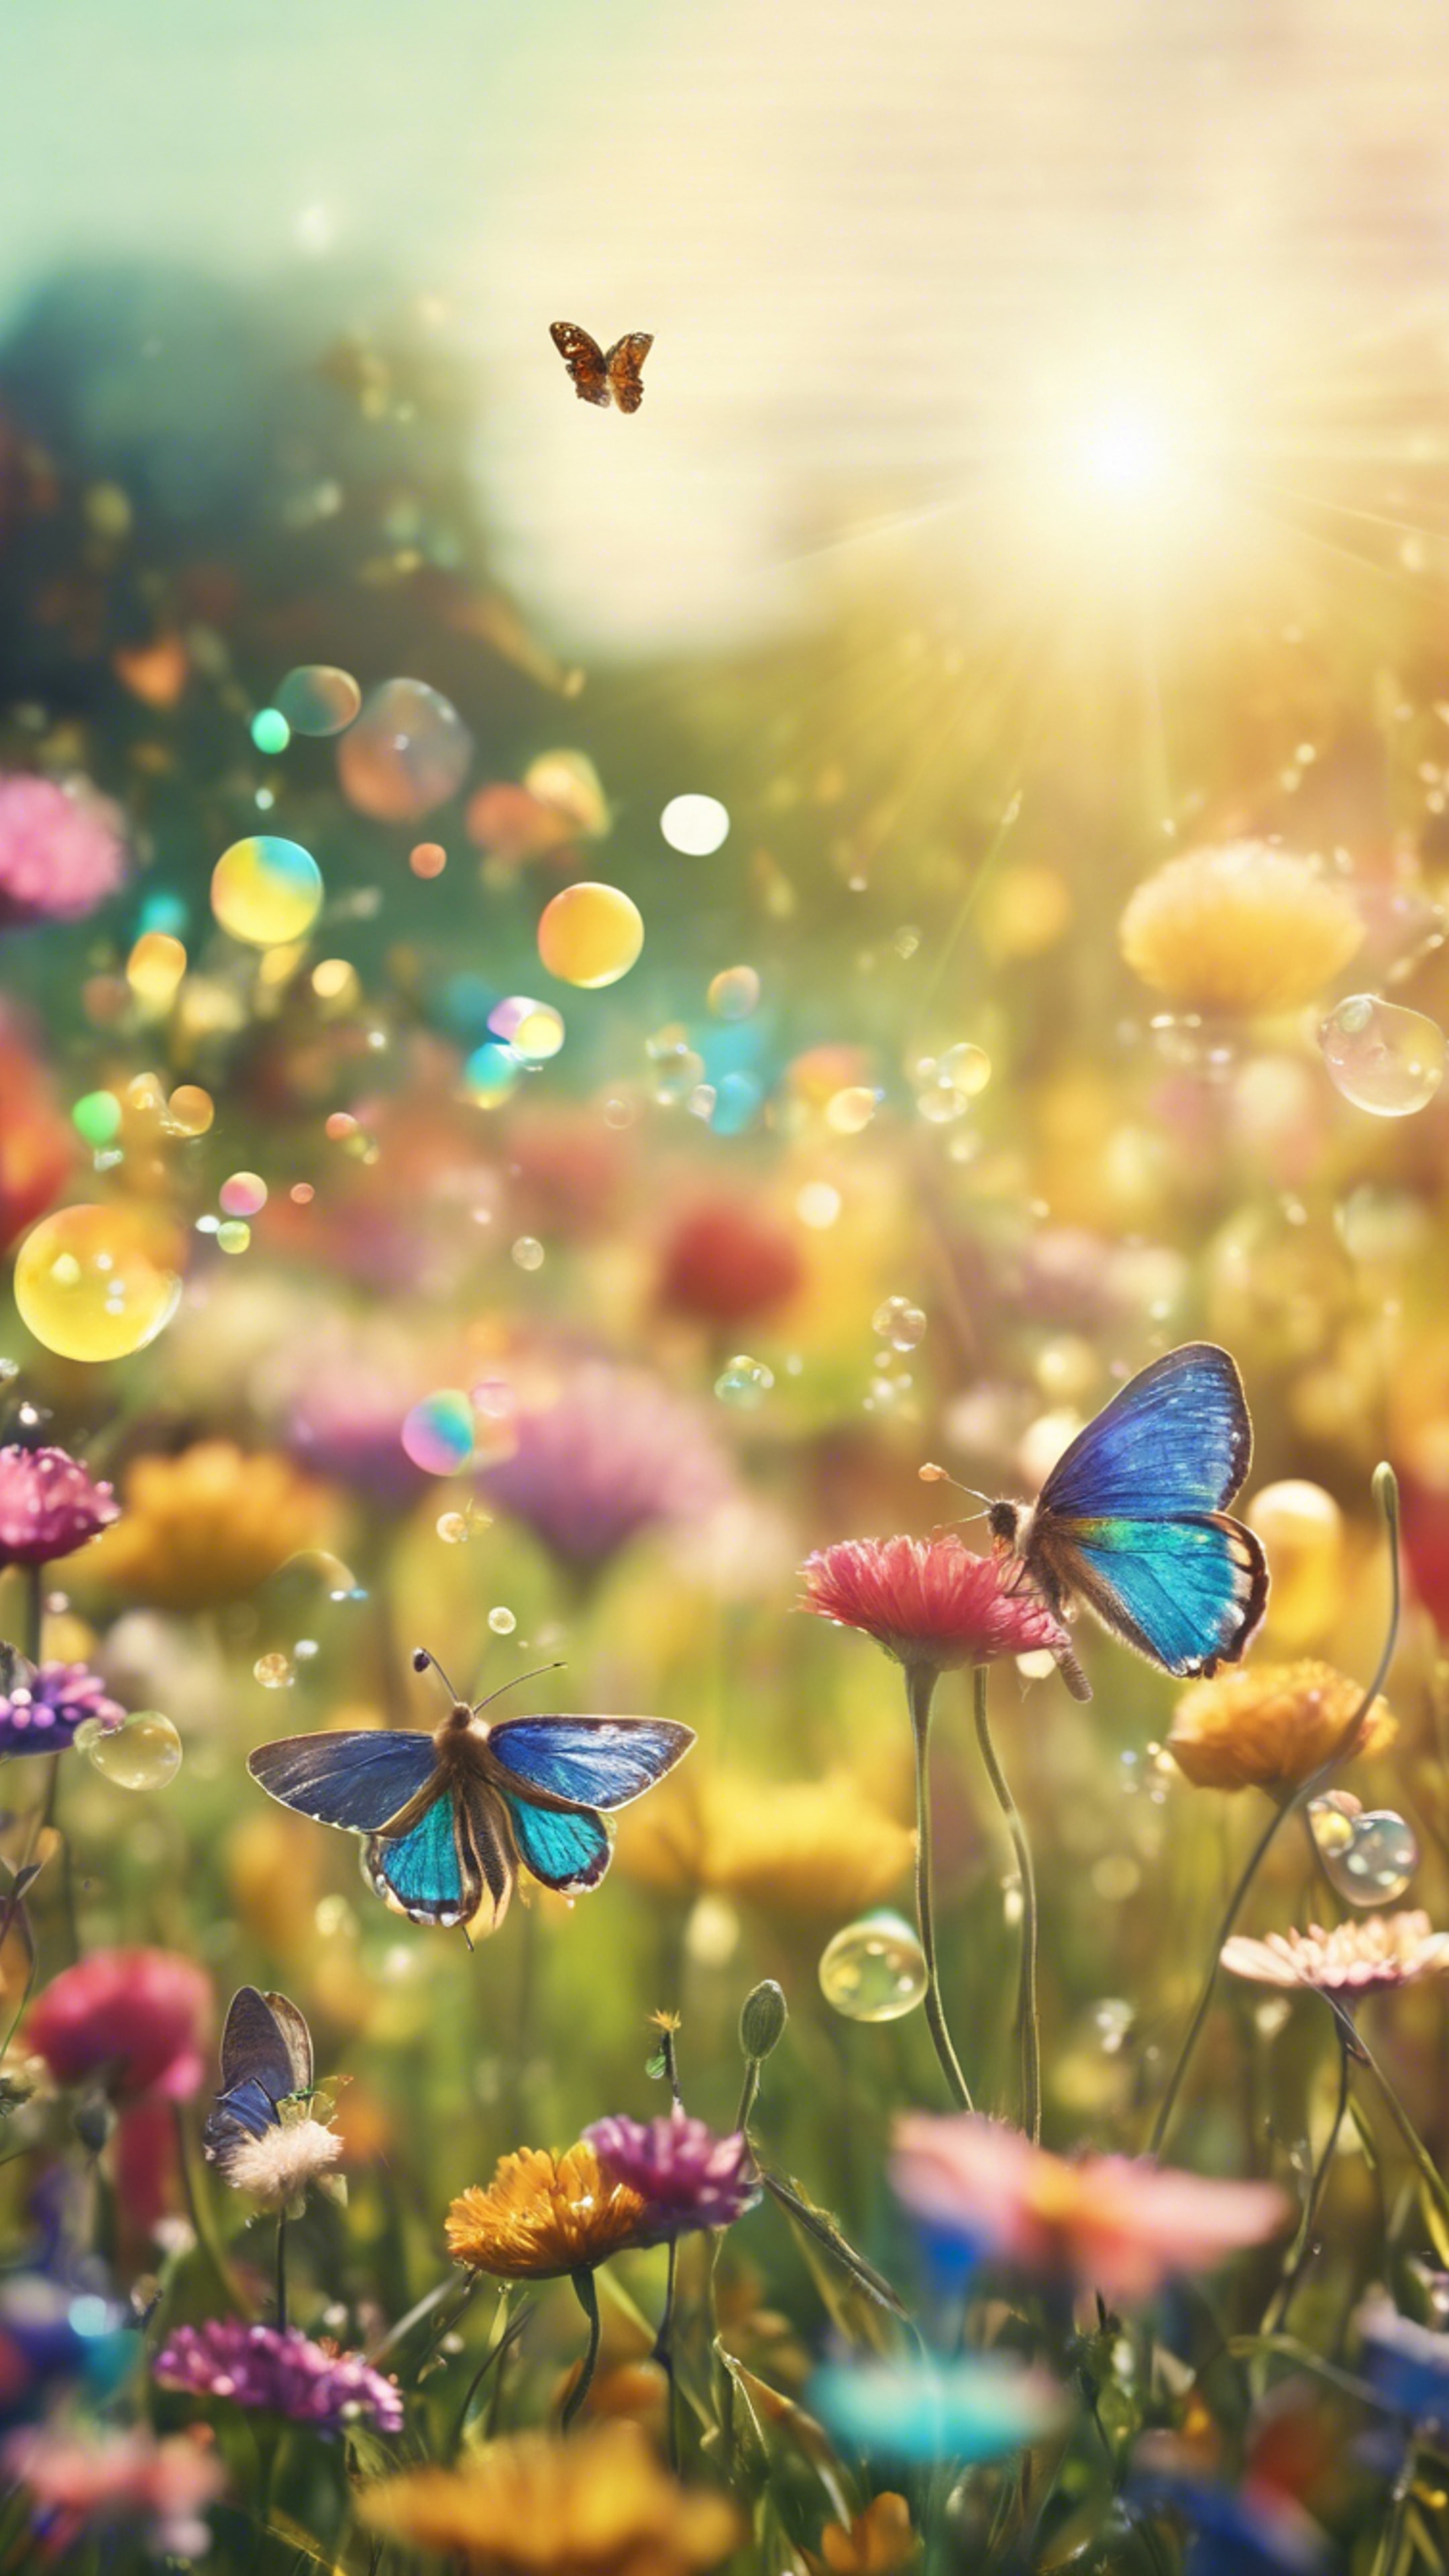 A child's dream of a playful, sunny meadow filled with rainbow butterflies and bubble-blowing bumblebees. Tapetai[6664242c62b24fa88676]